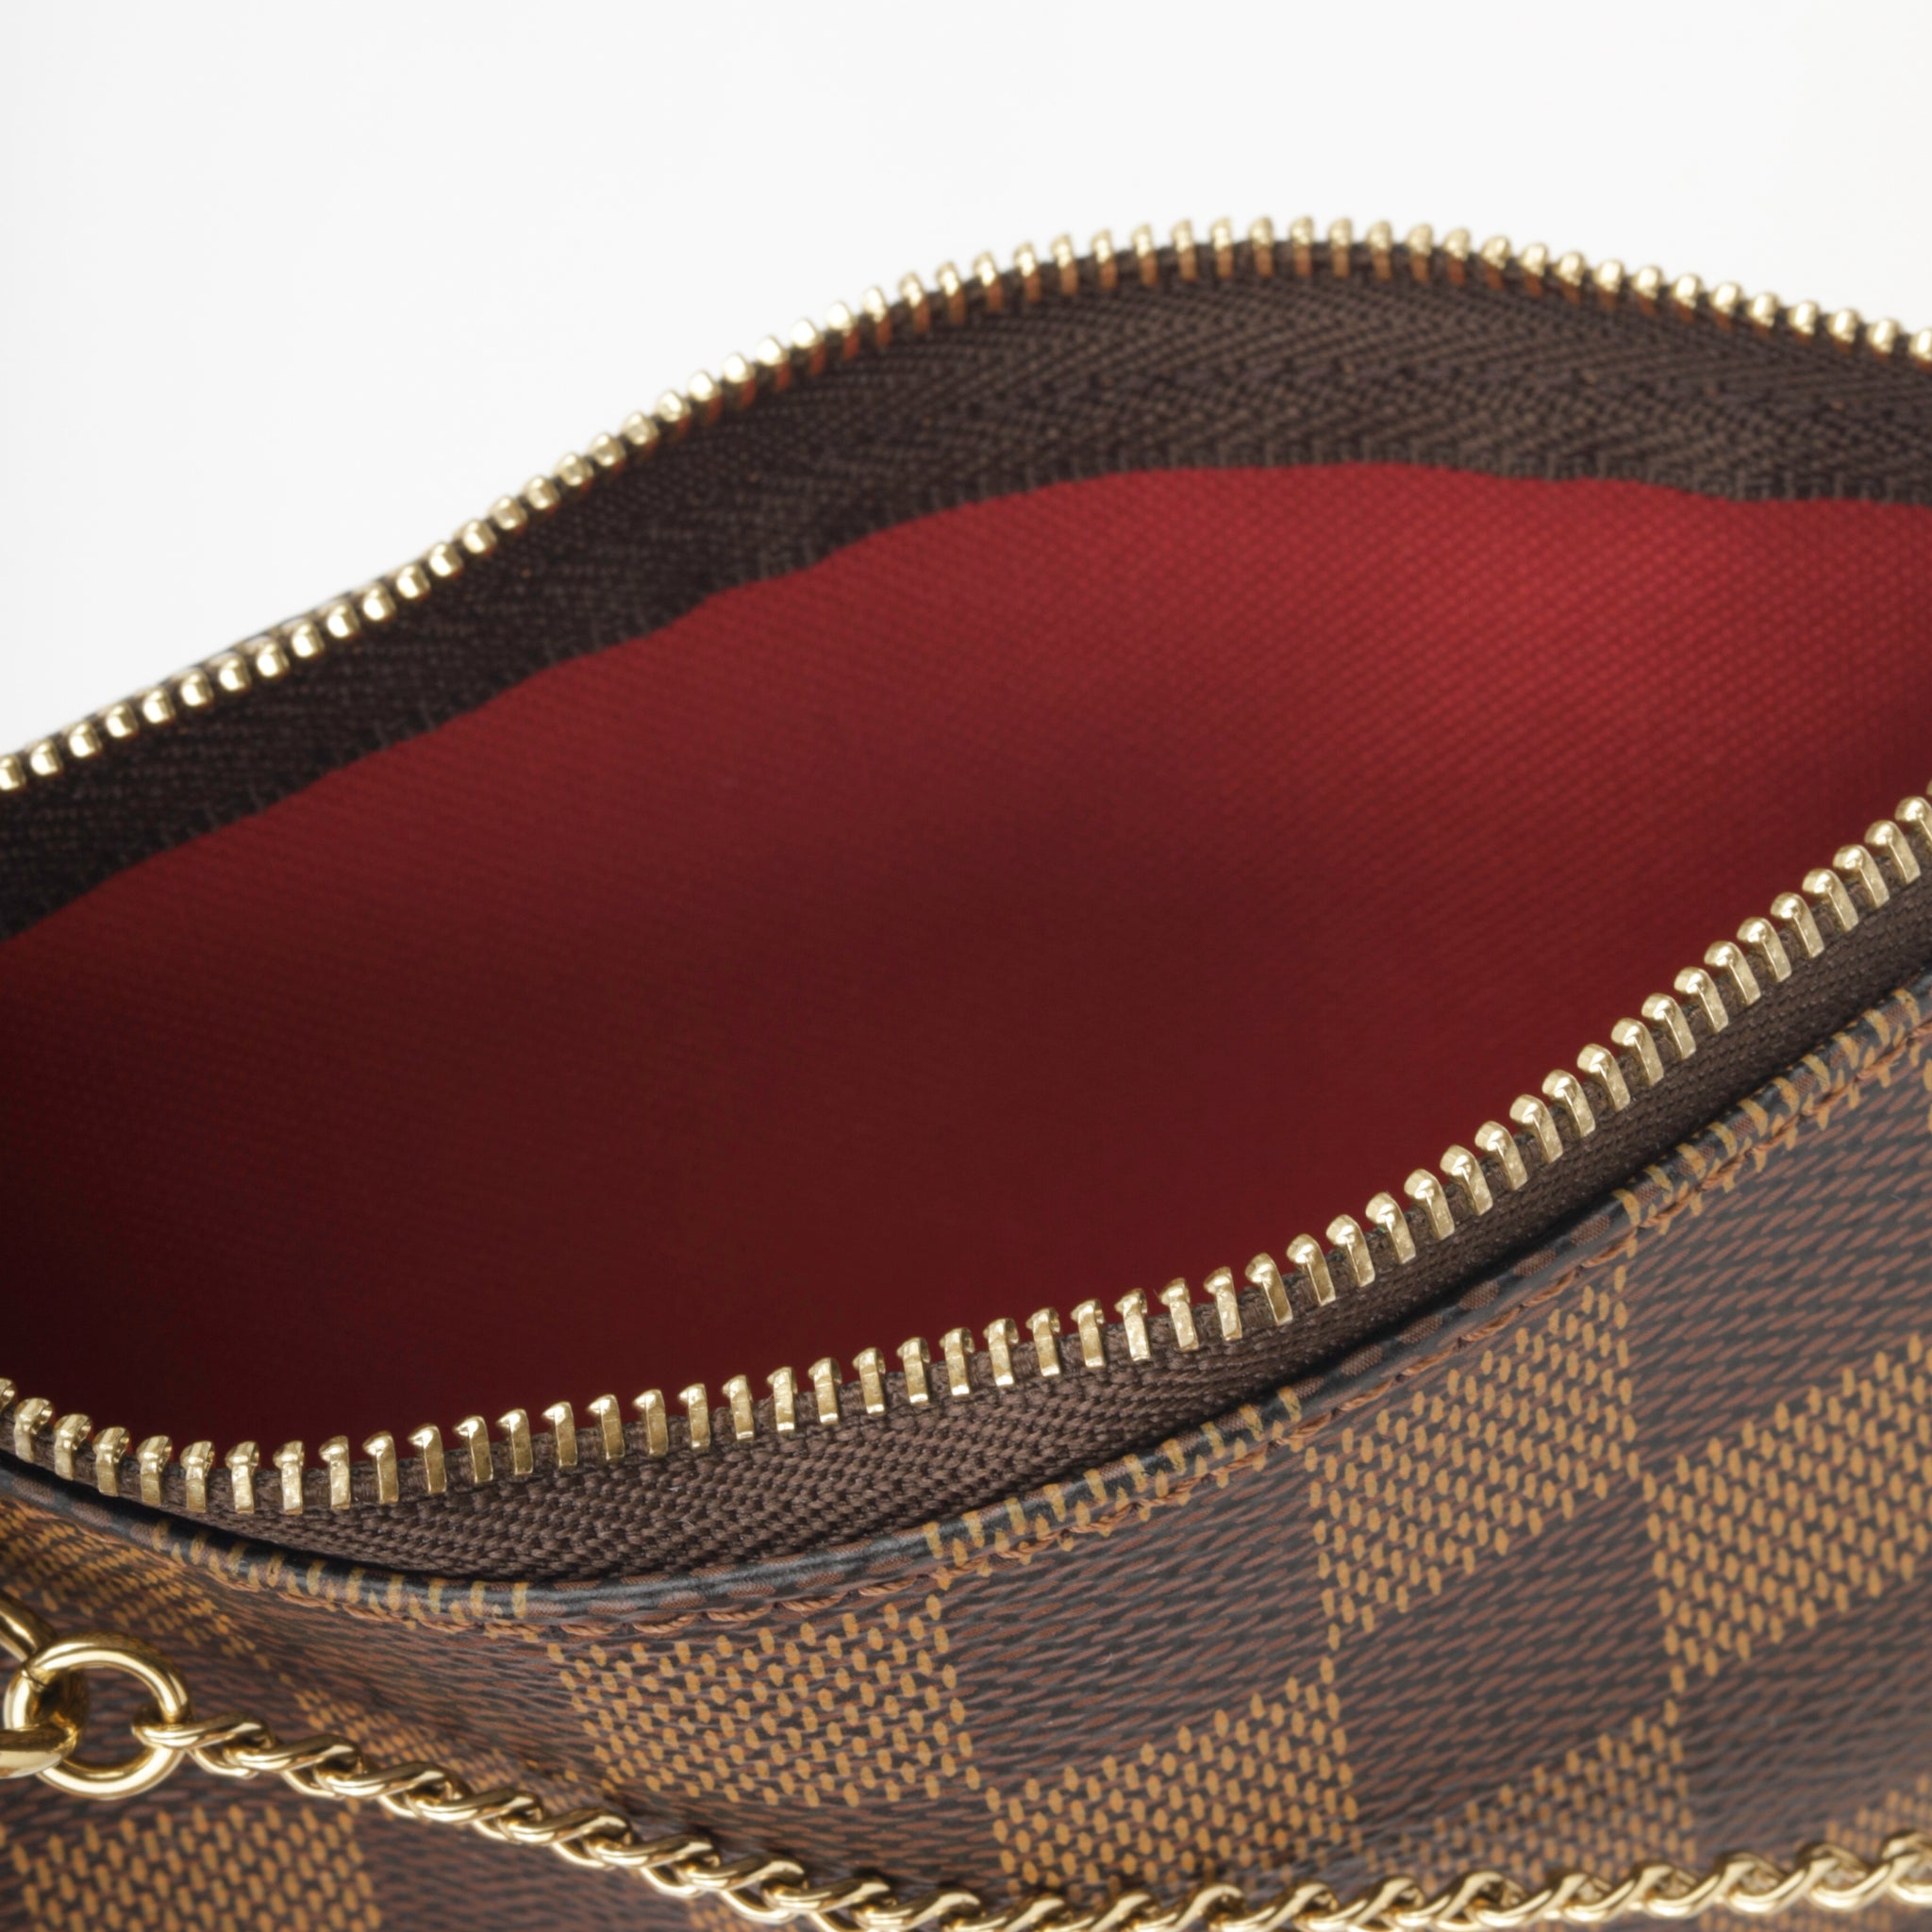 Bagista - The Pochette is a petite accessory perfect to add to